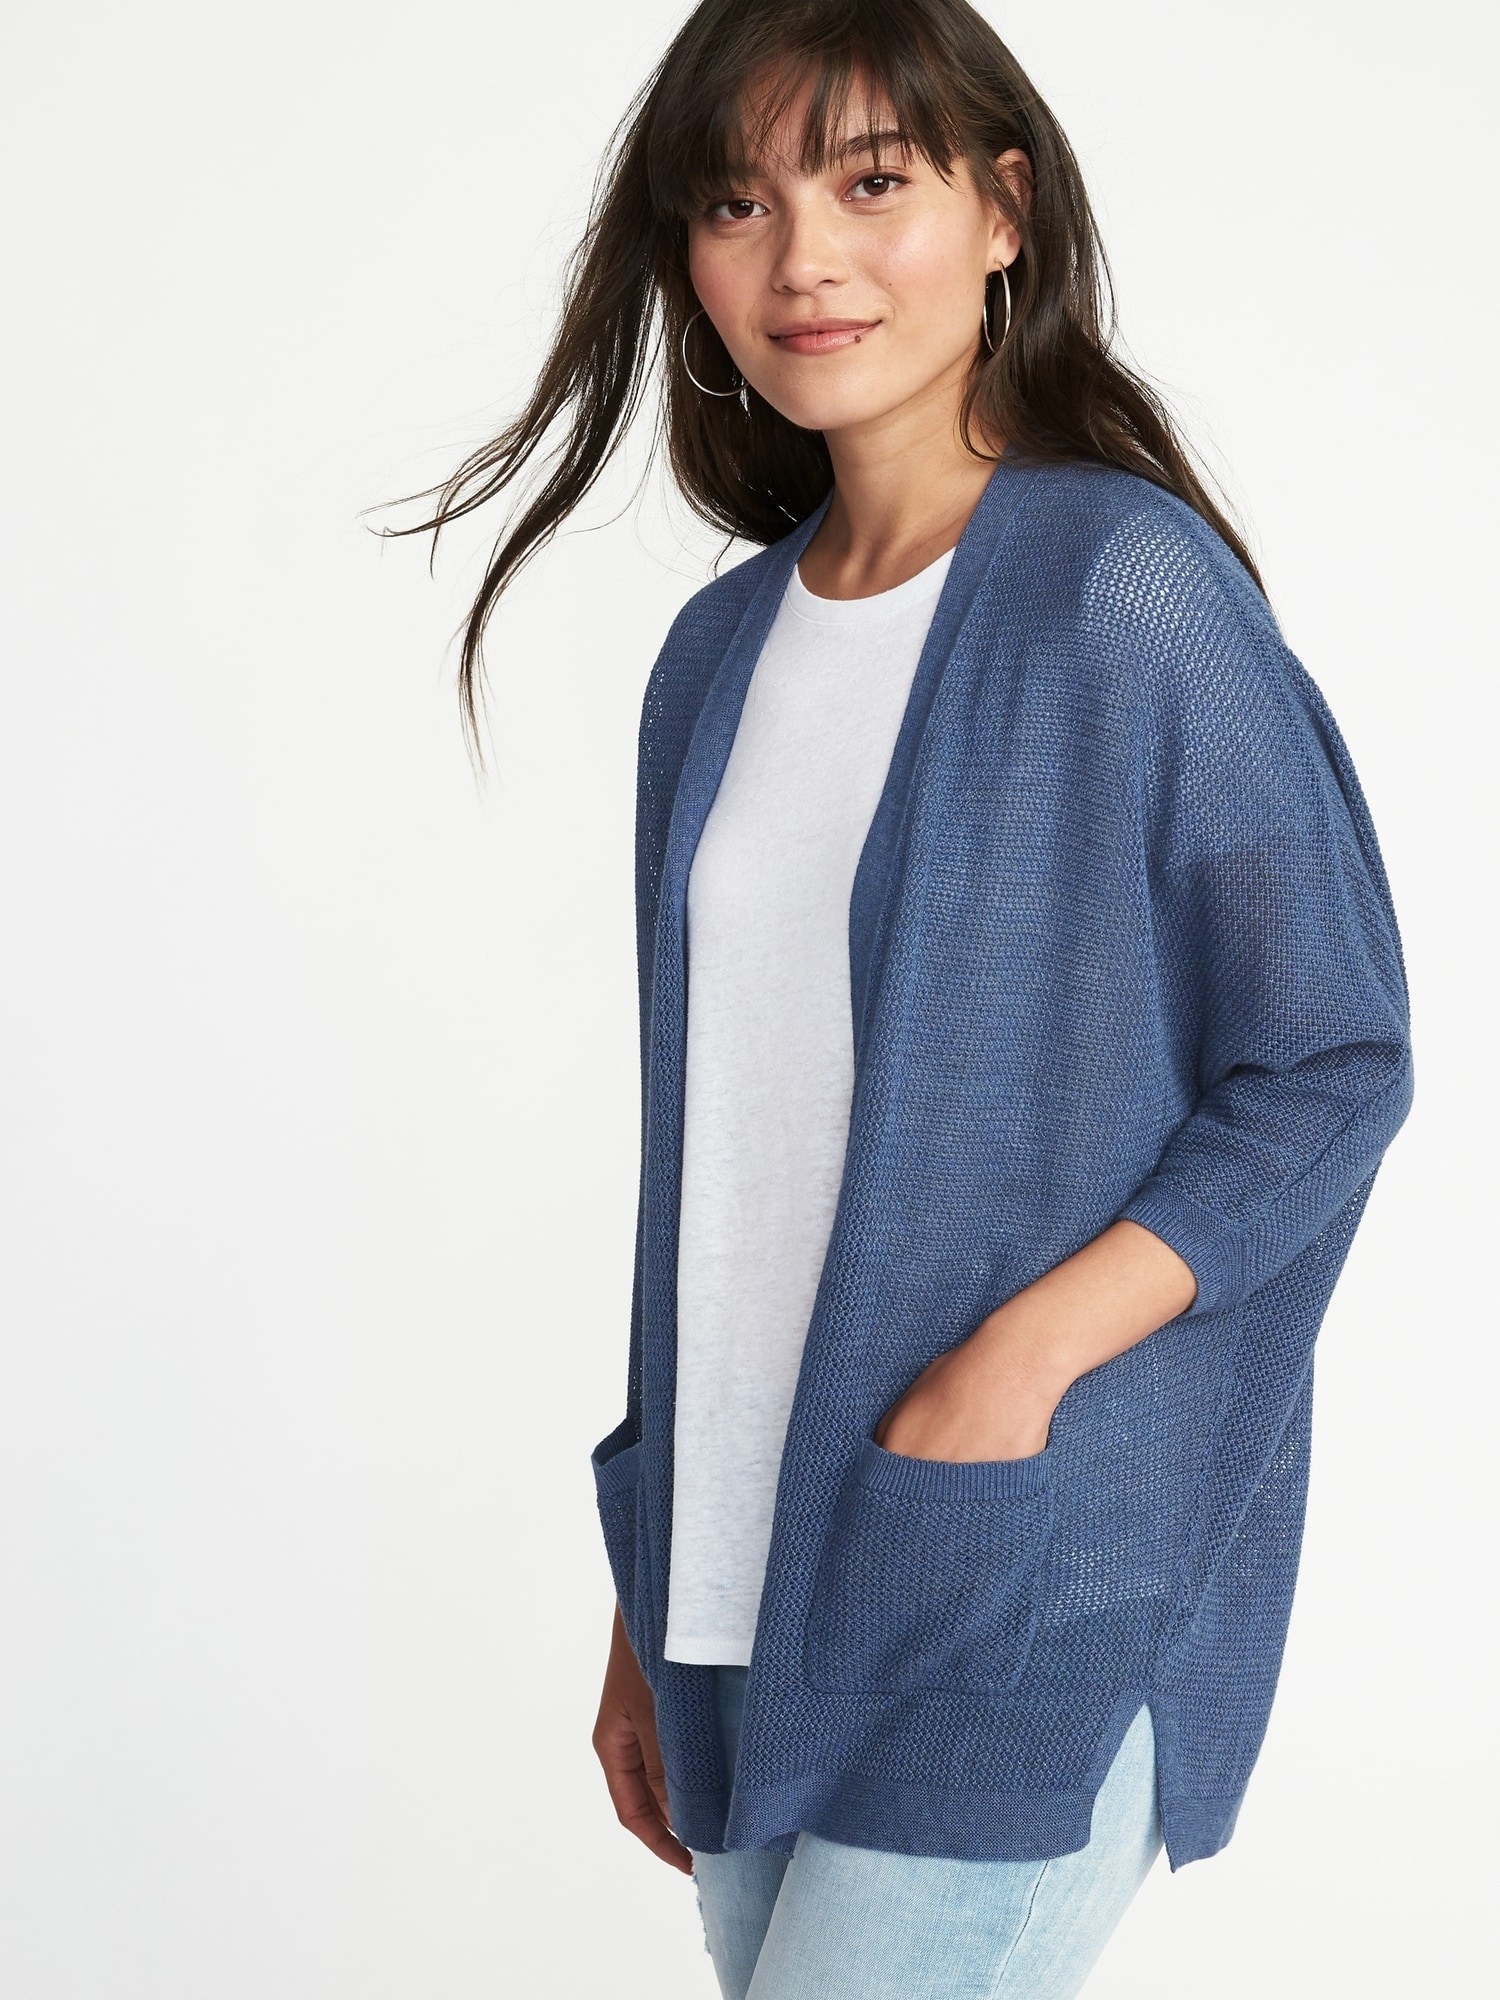 29 Sweaters To Keep You Warm If Your Office Is Freezing